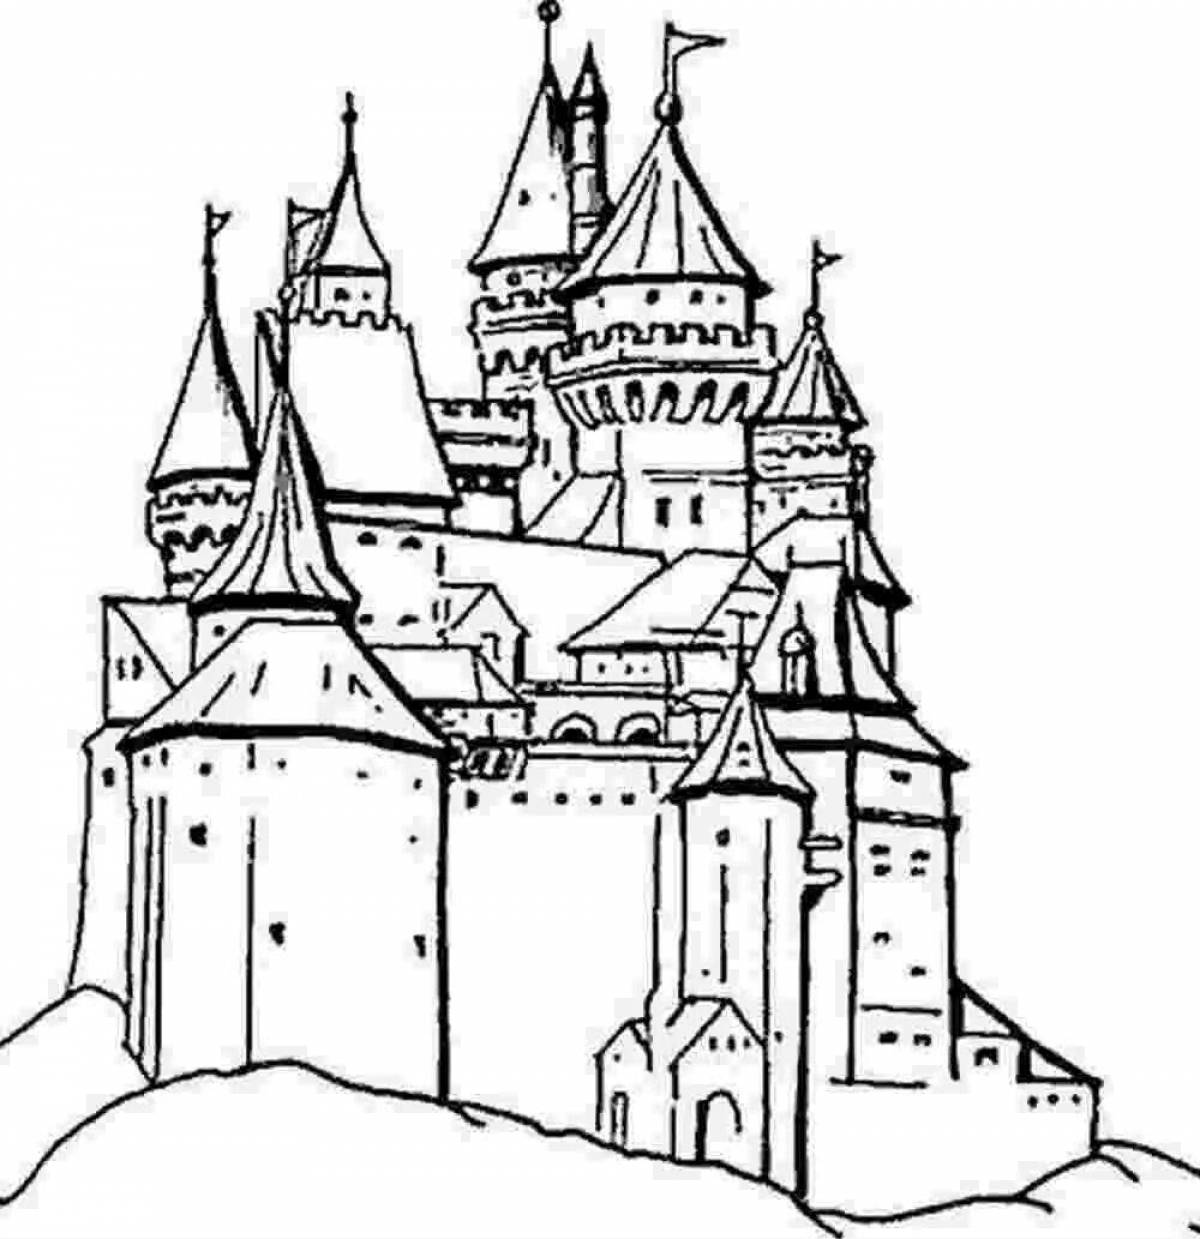 Coloring book of luxurious medieval castle